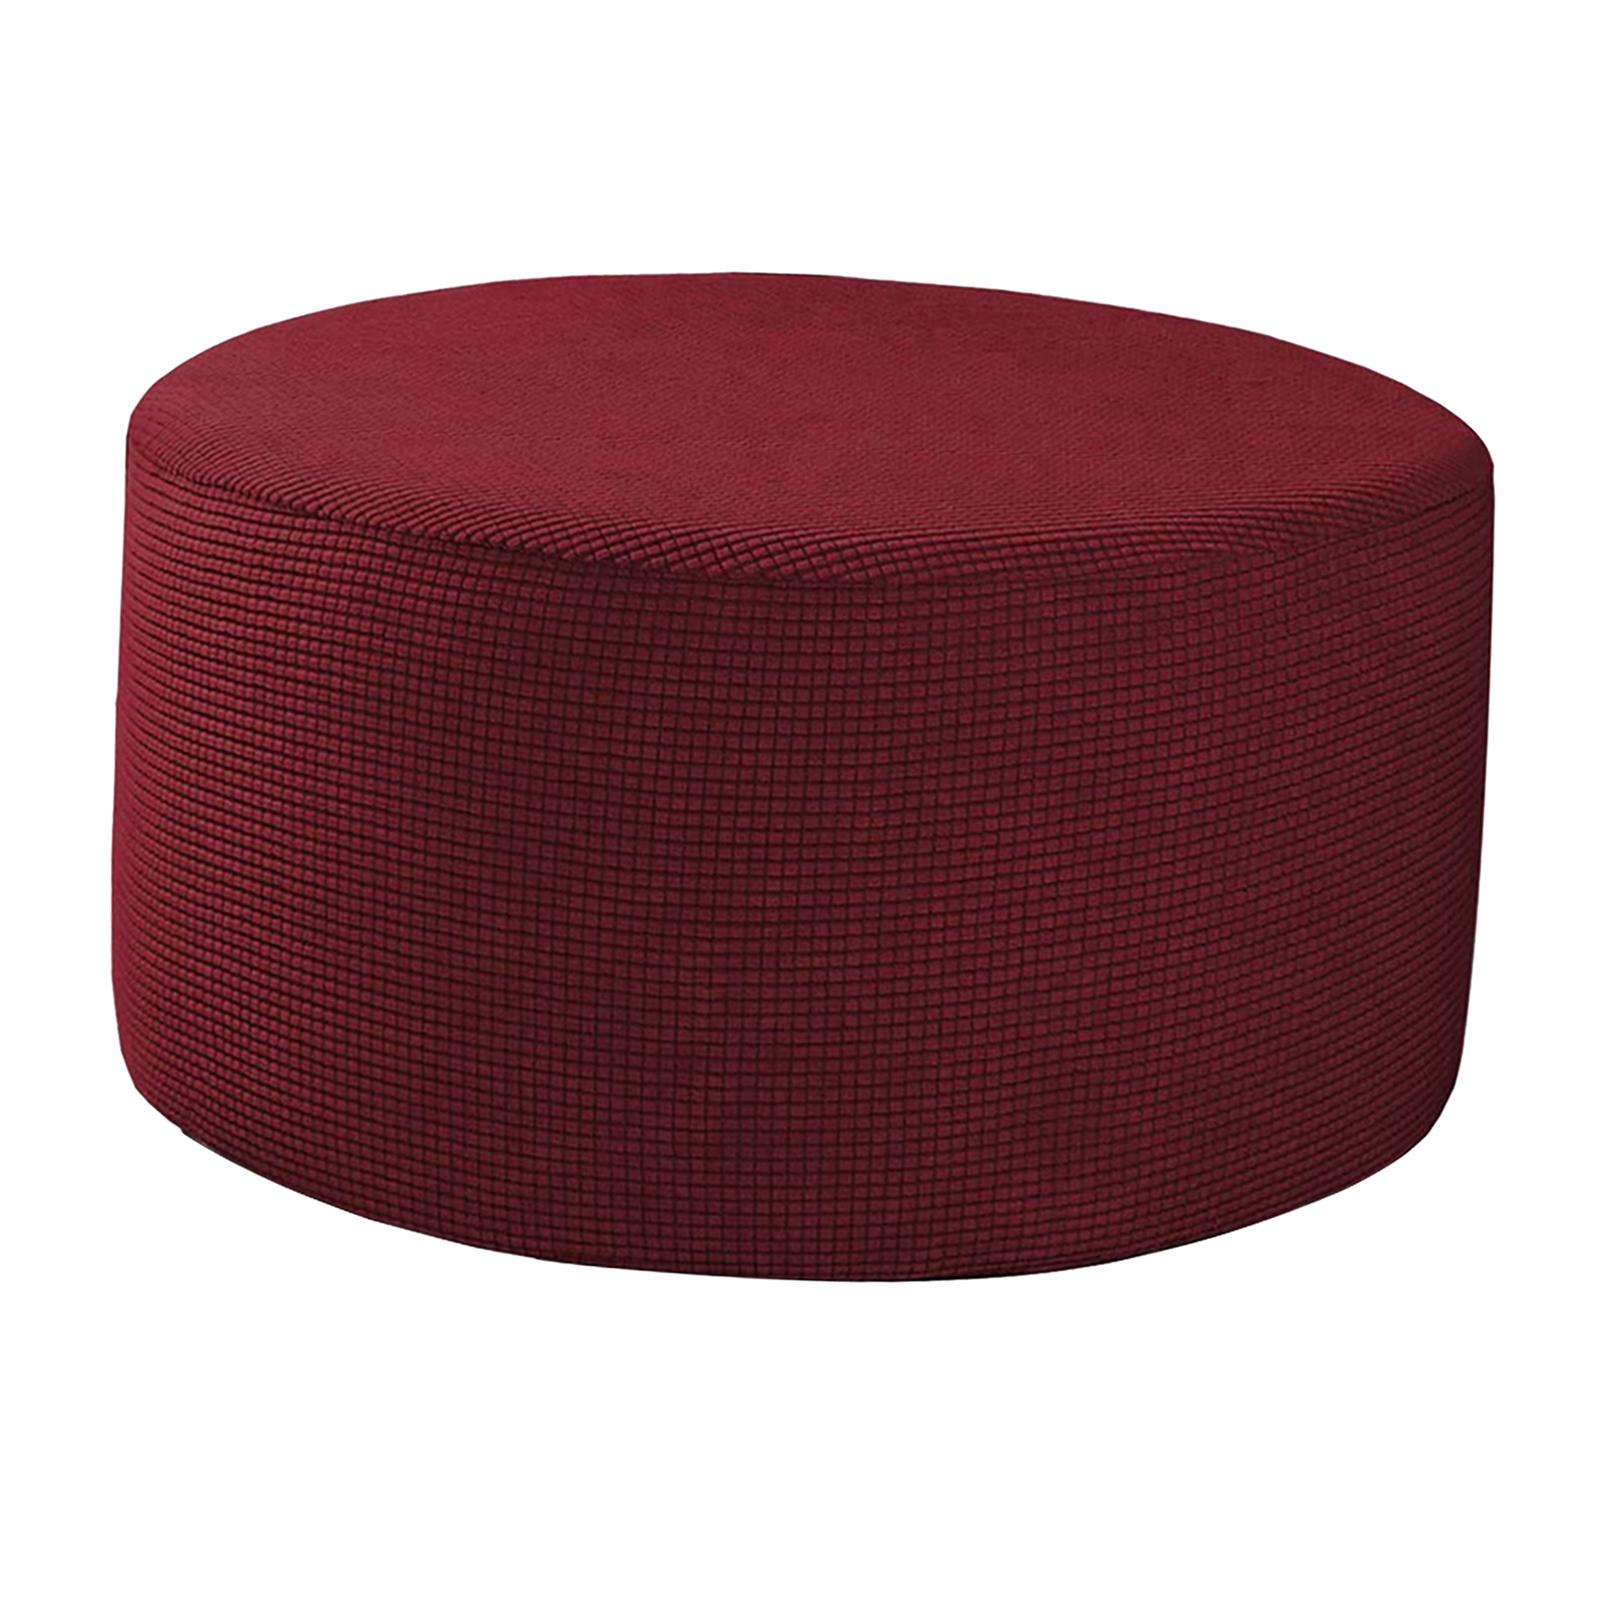 Ottoman Slipcovers Round Ottoman Footstool Cover Removable Red - image 2 of 6